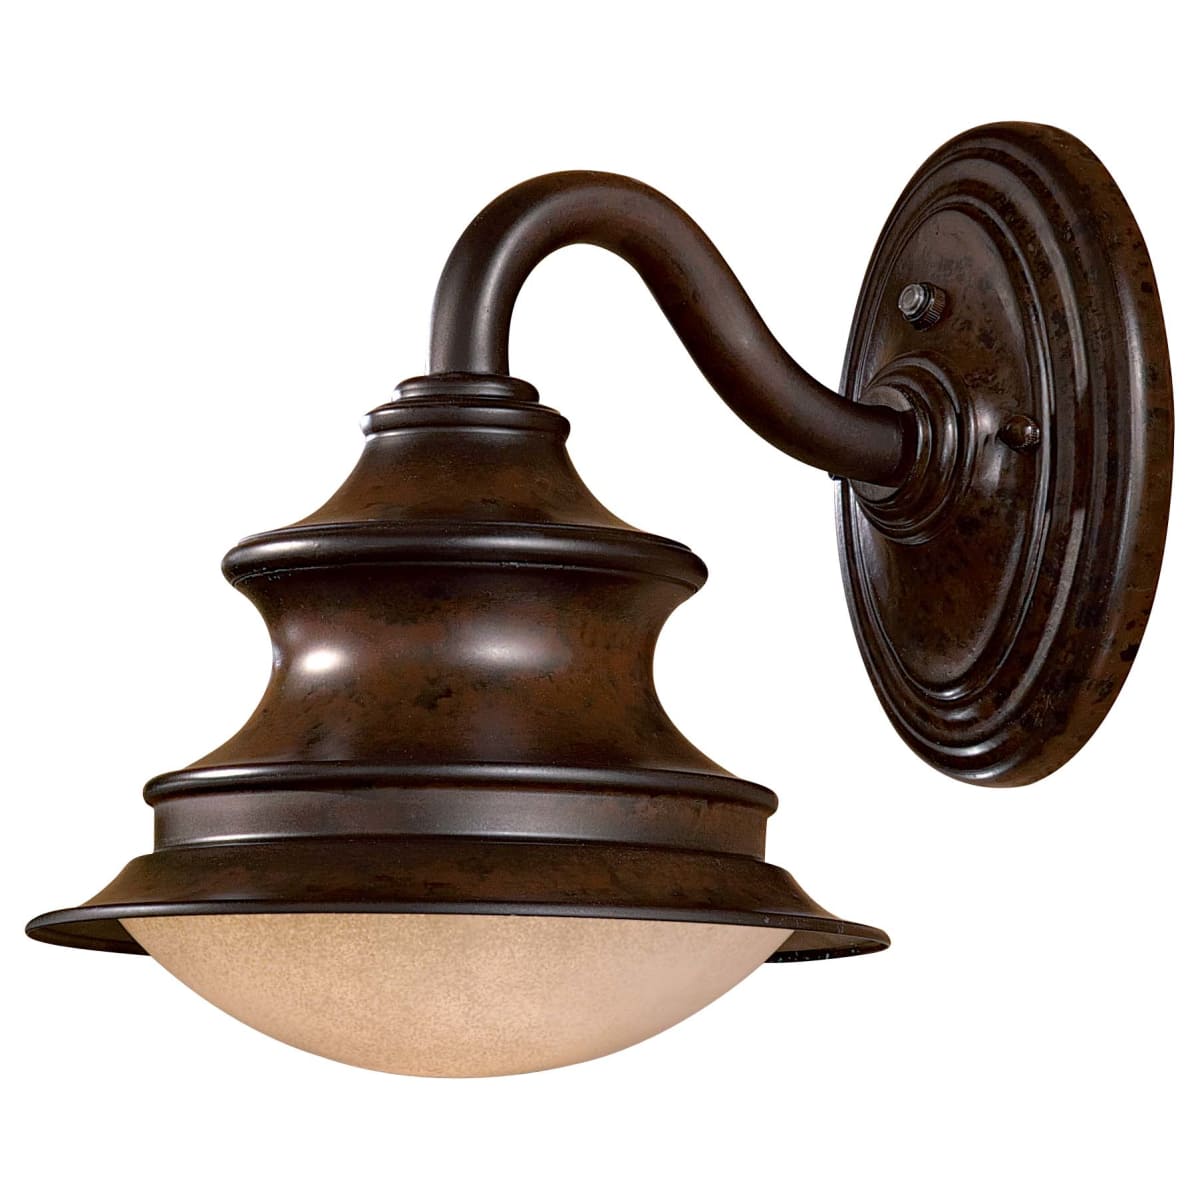 The Great Outdoors 8121 A188 Pl Windsor Rust 1 Light 11 Height